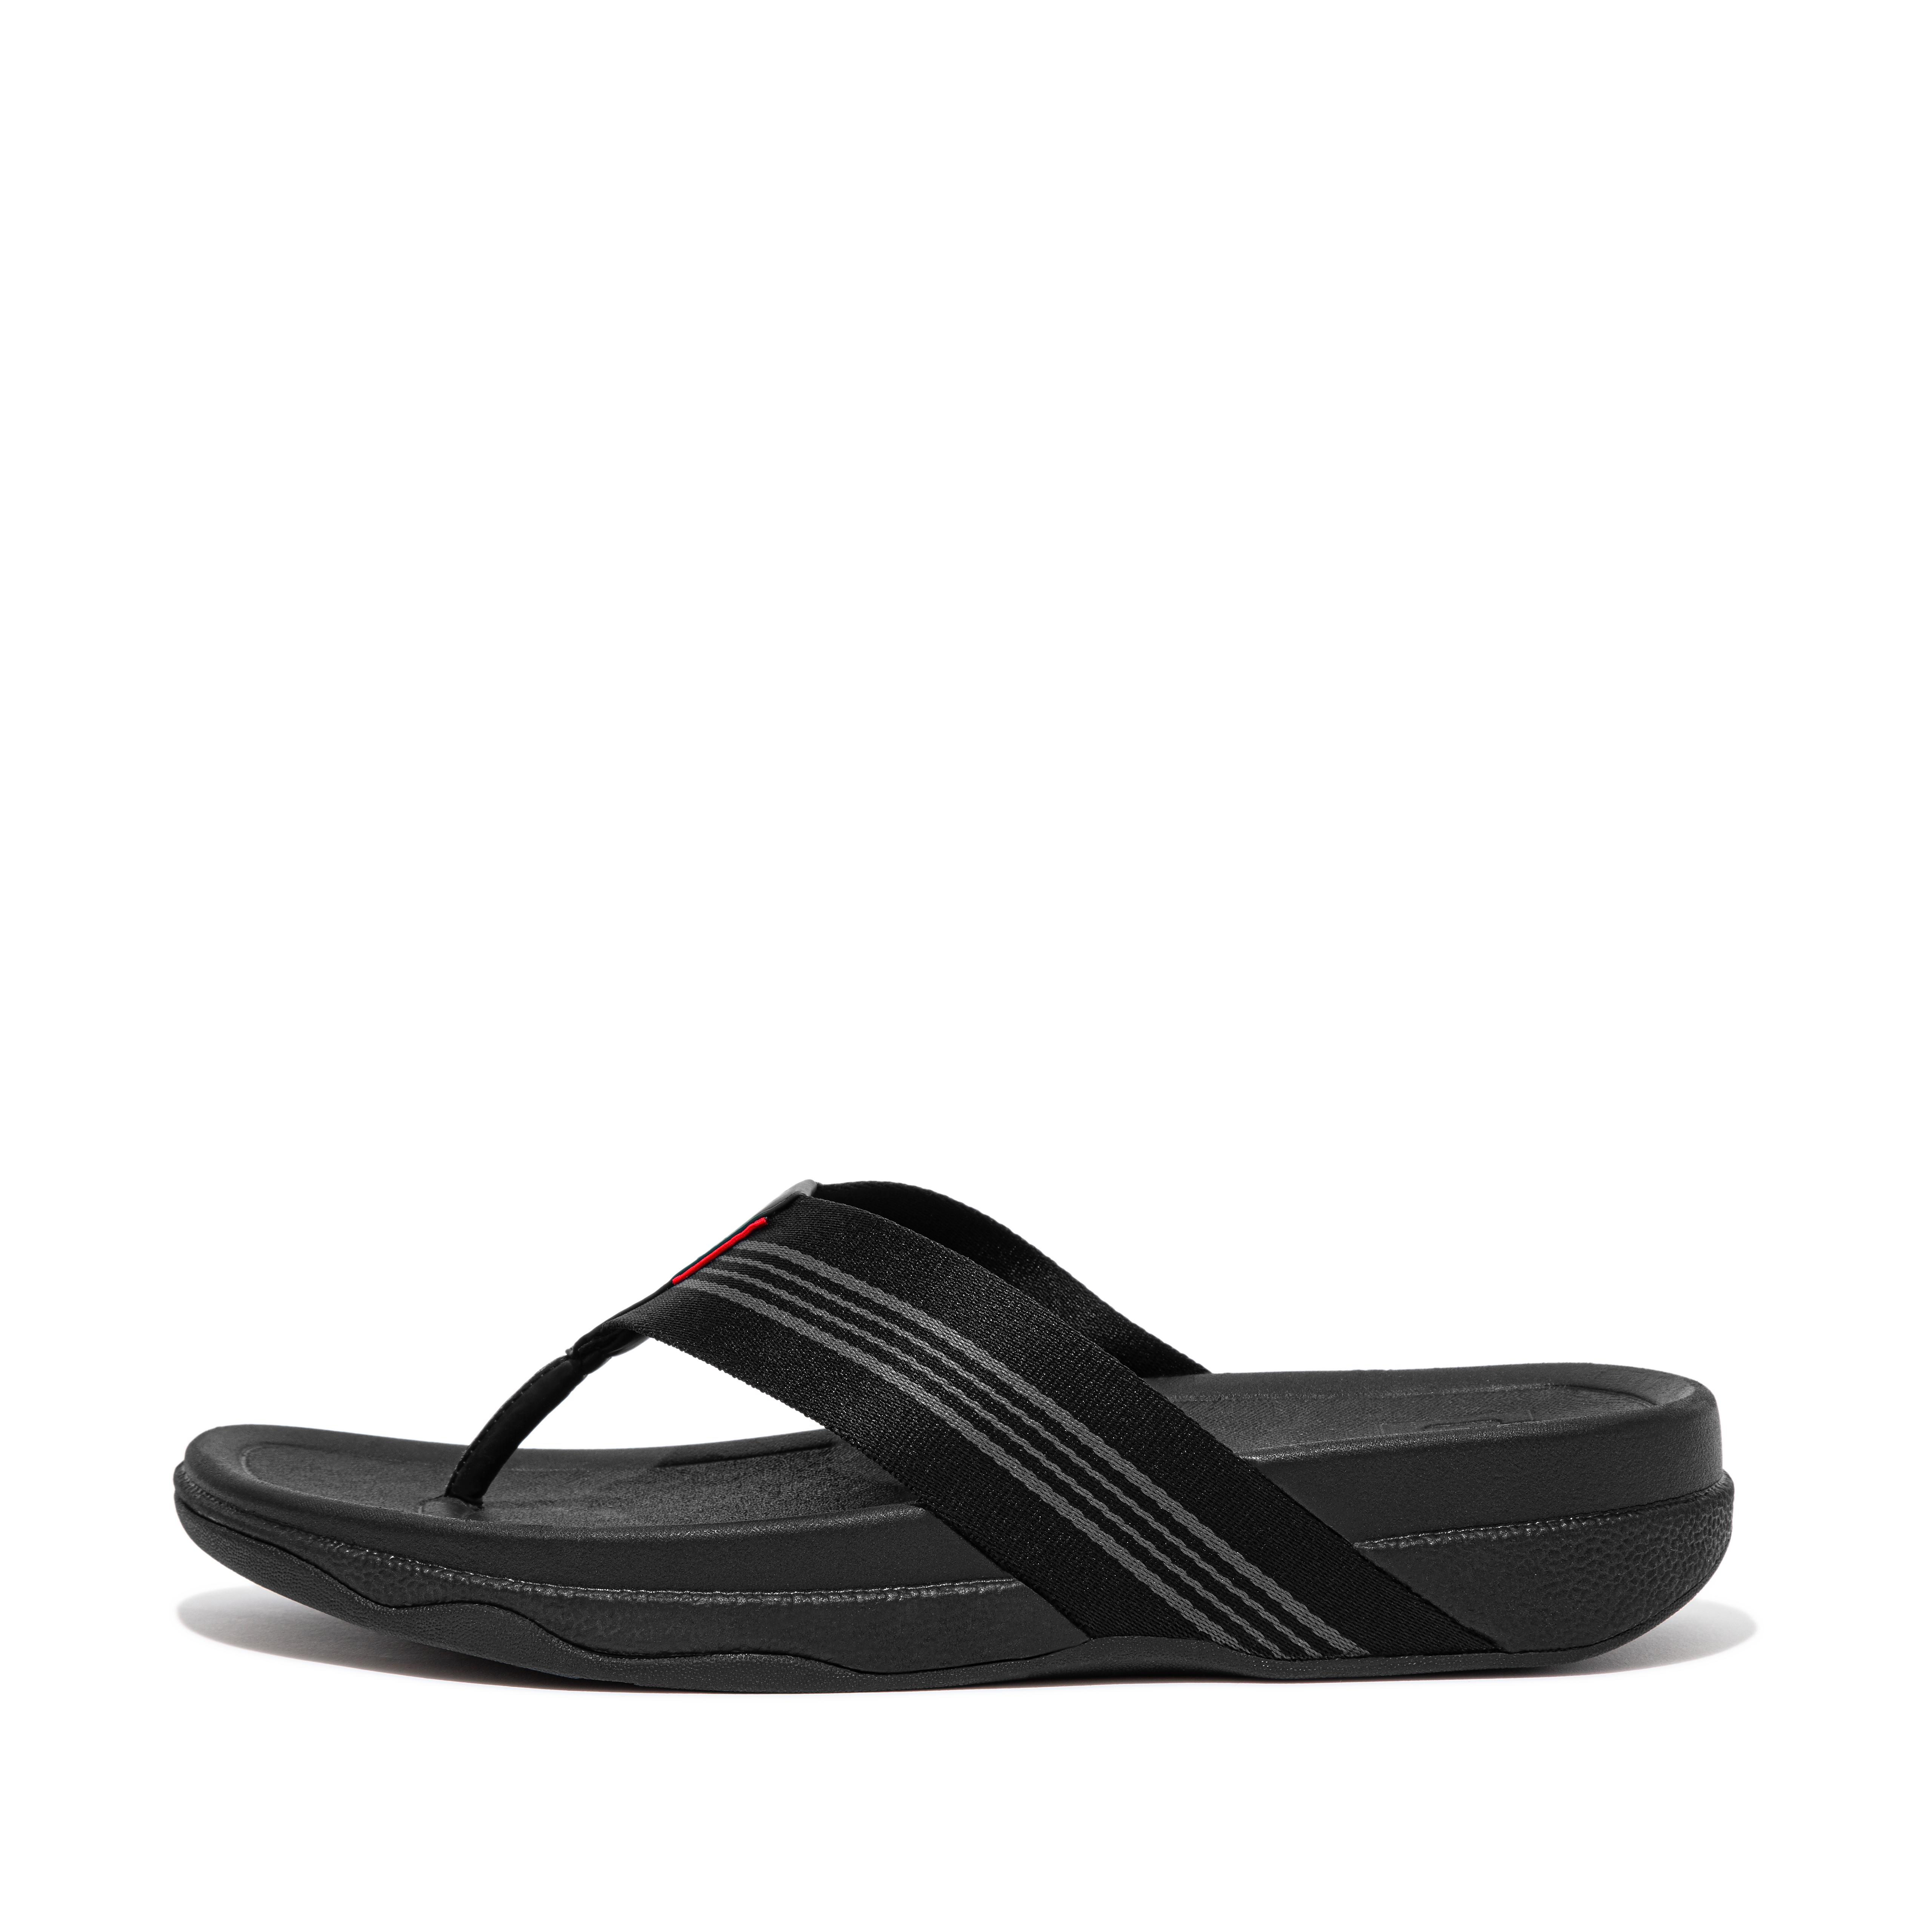 Men's Surfer Polyester-Webbing Toe-Thongs | FitFlop US